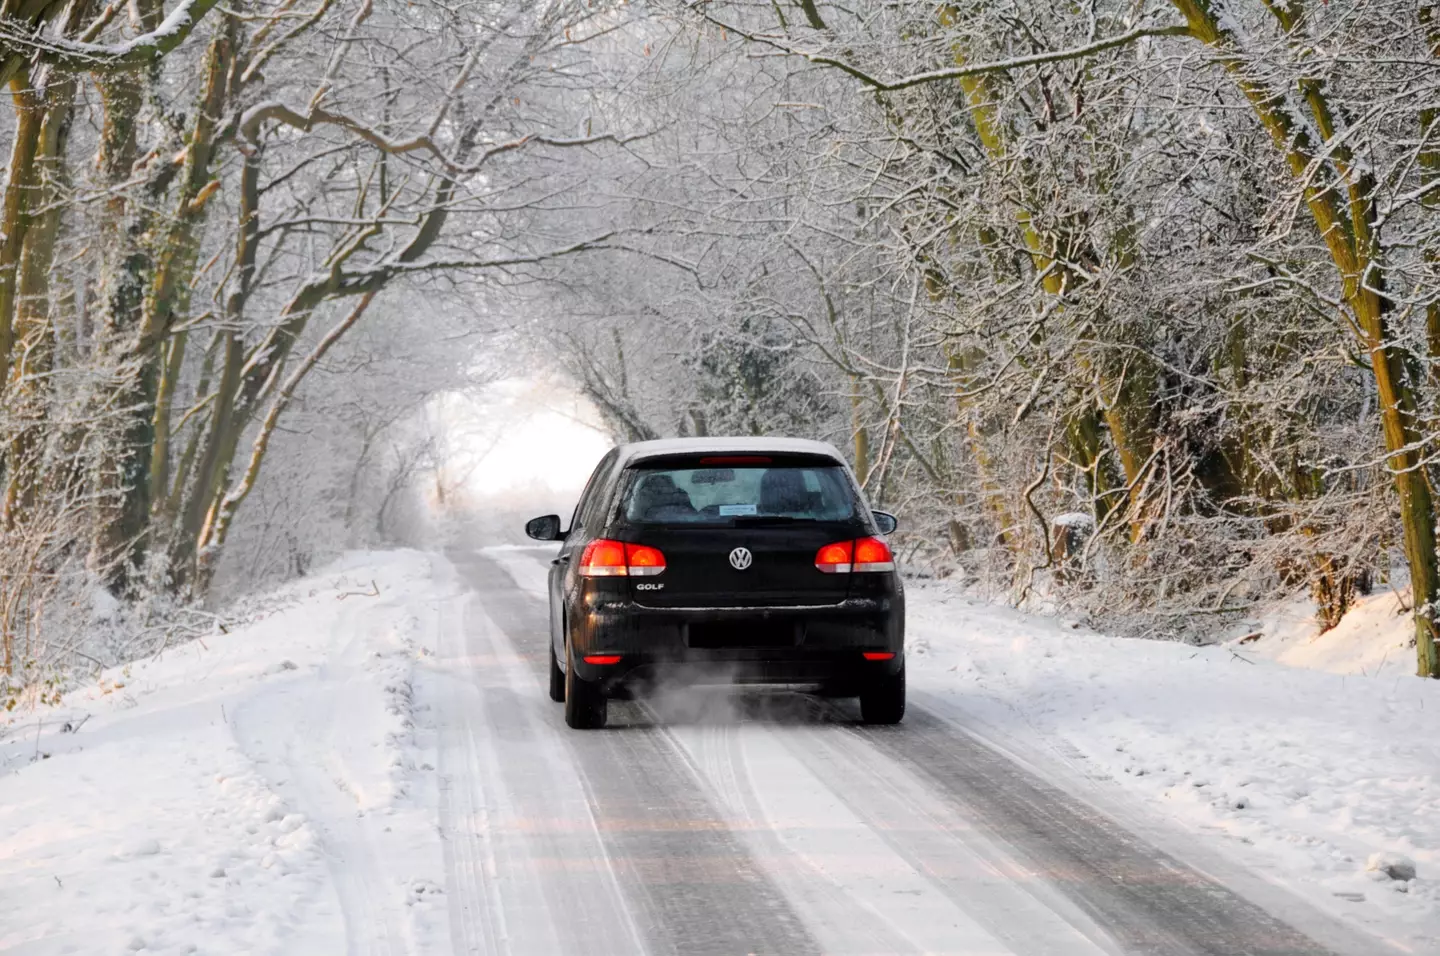 Bad news for motorists... the cold conditions are expected to go into next week.